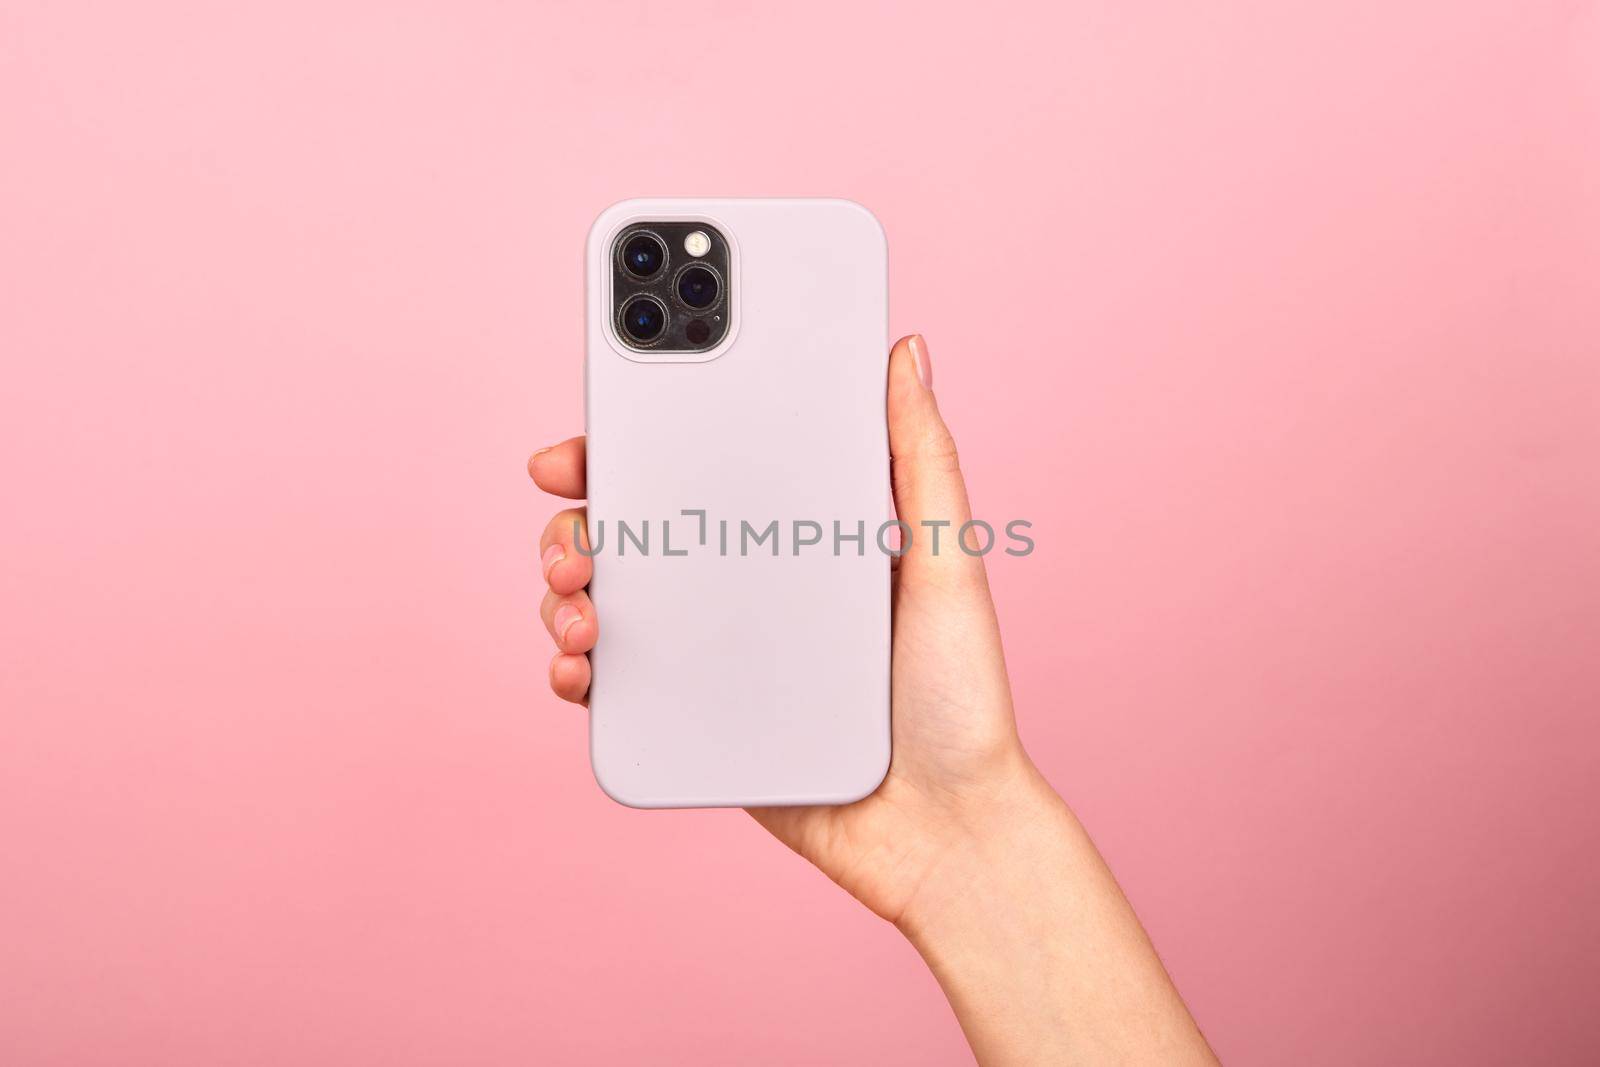 Female hand holding white smartphone in soft silicone cover back view . Phone case mock up isolated on pink background